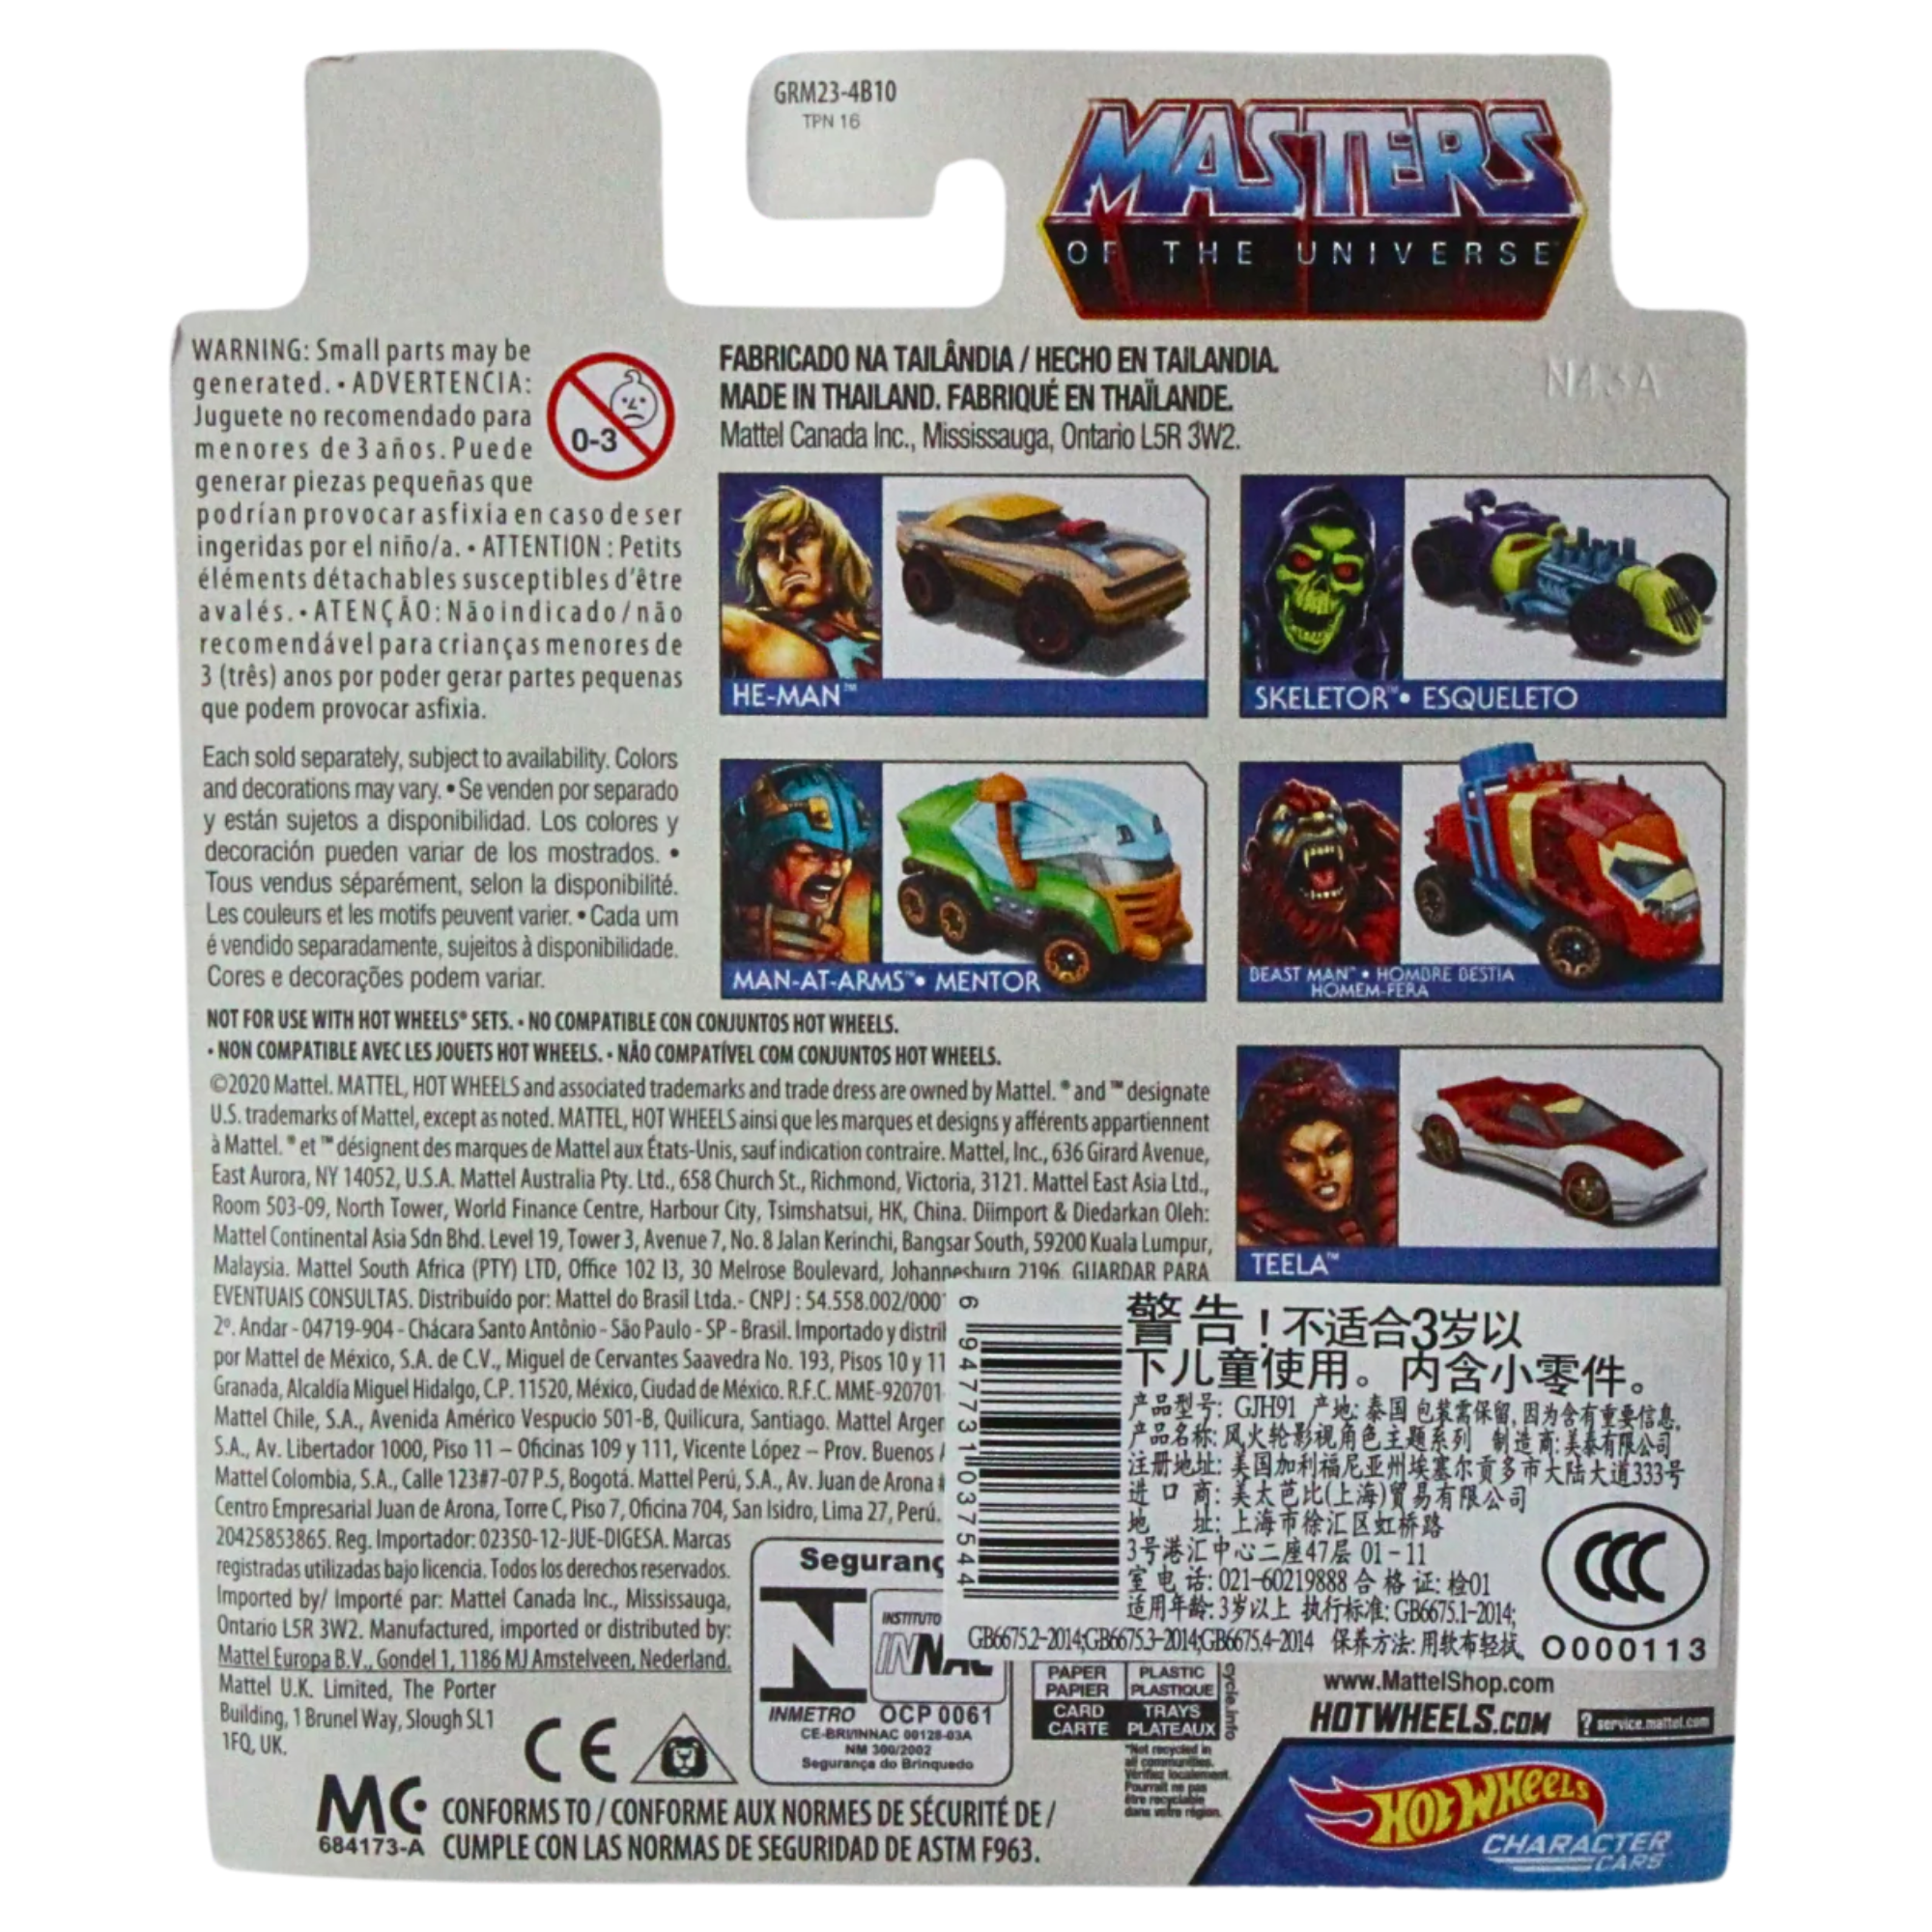 Character Cars Hot Wheels Masters of The Universe Die-cast 1:64 Scale Vehicle Car - Man At Arms Mentor 3/5 - Toptoys2u